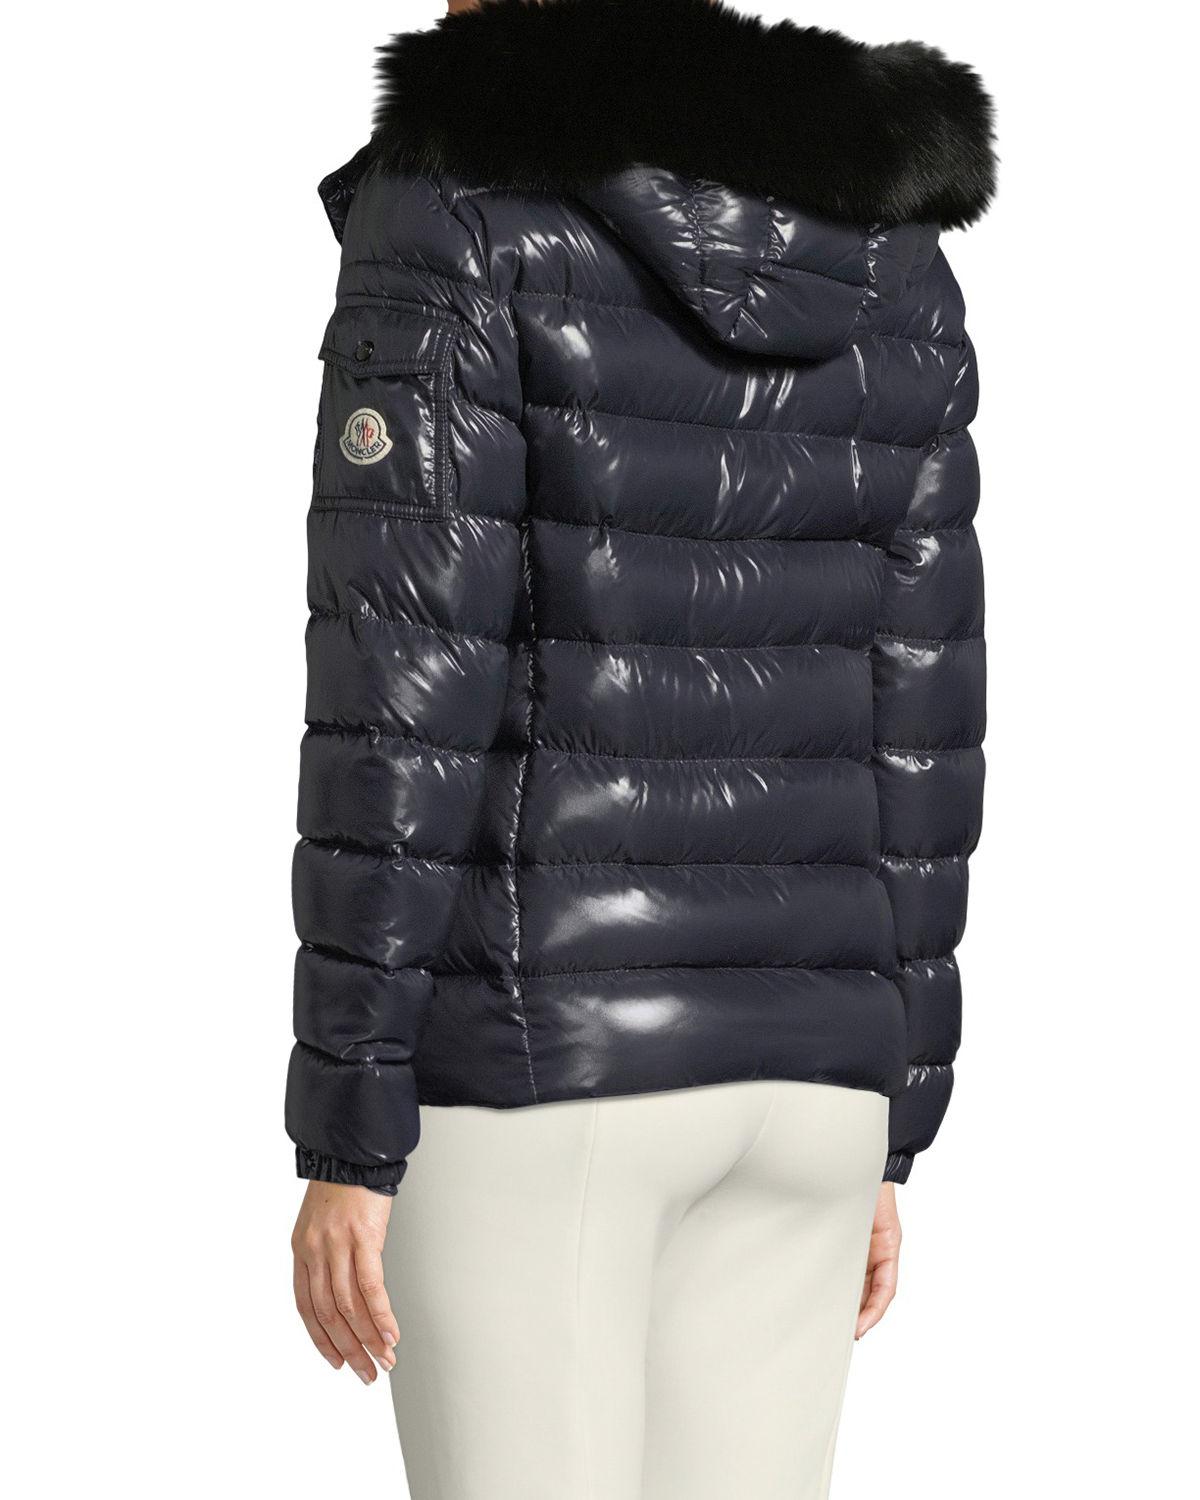 moncler puffer jacket with fur hood